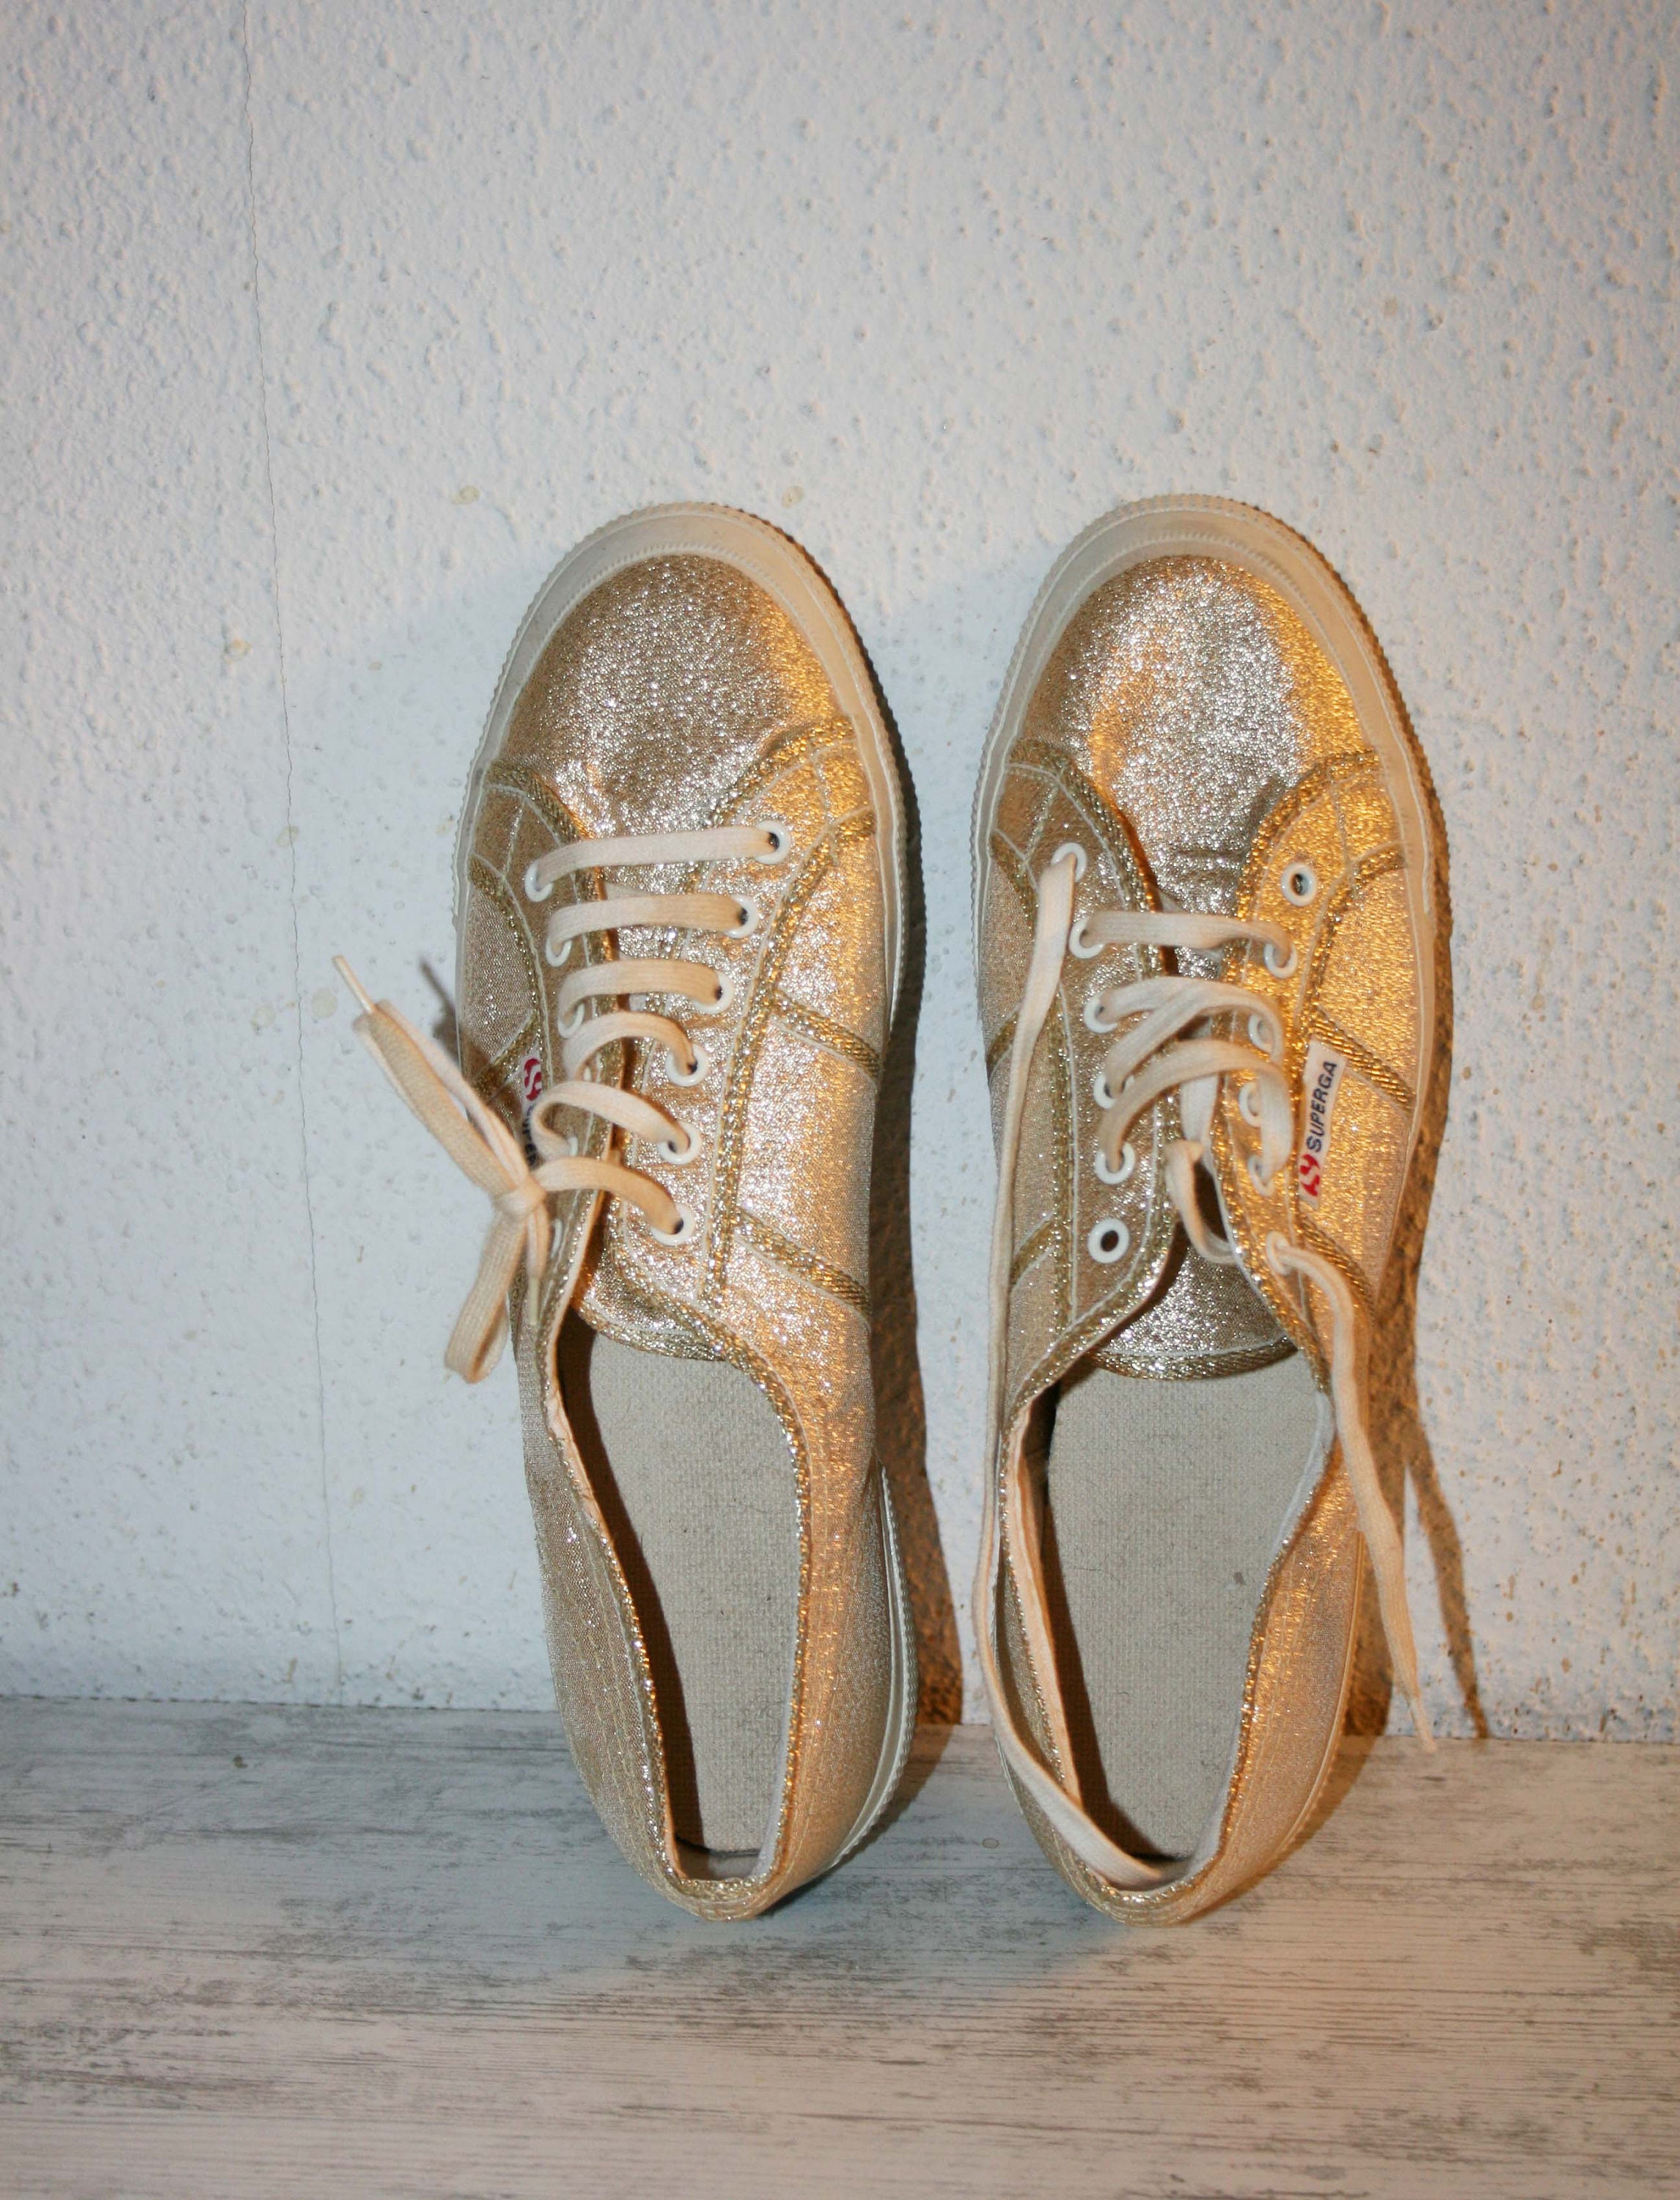 Superga 2750 Rose Gold Metallic Trainers - Shoes from Shirt Sleeves UK